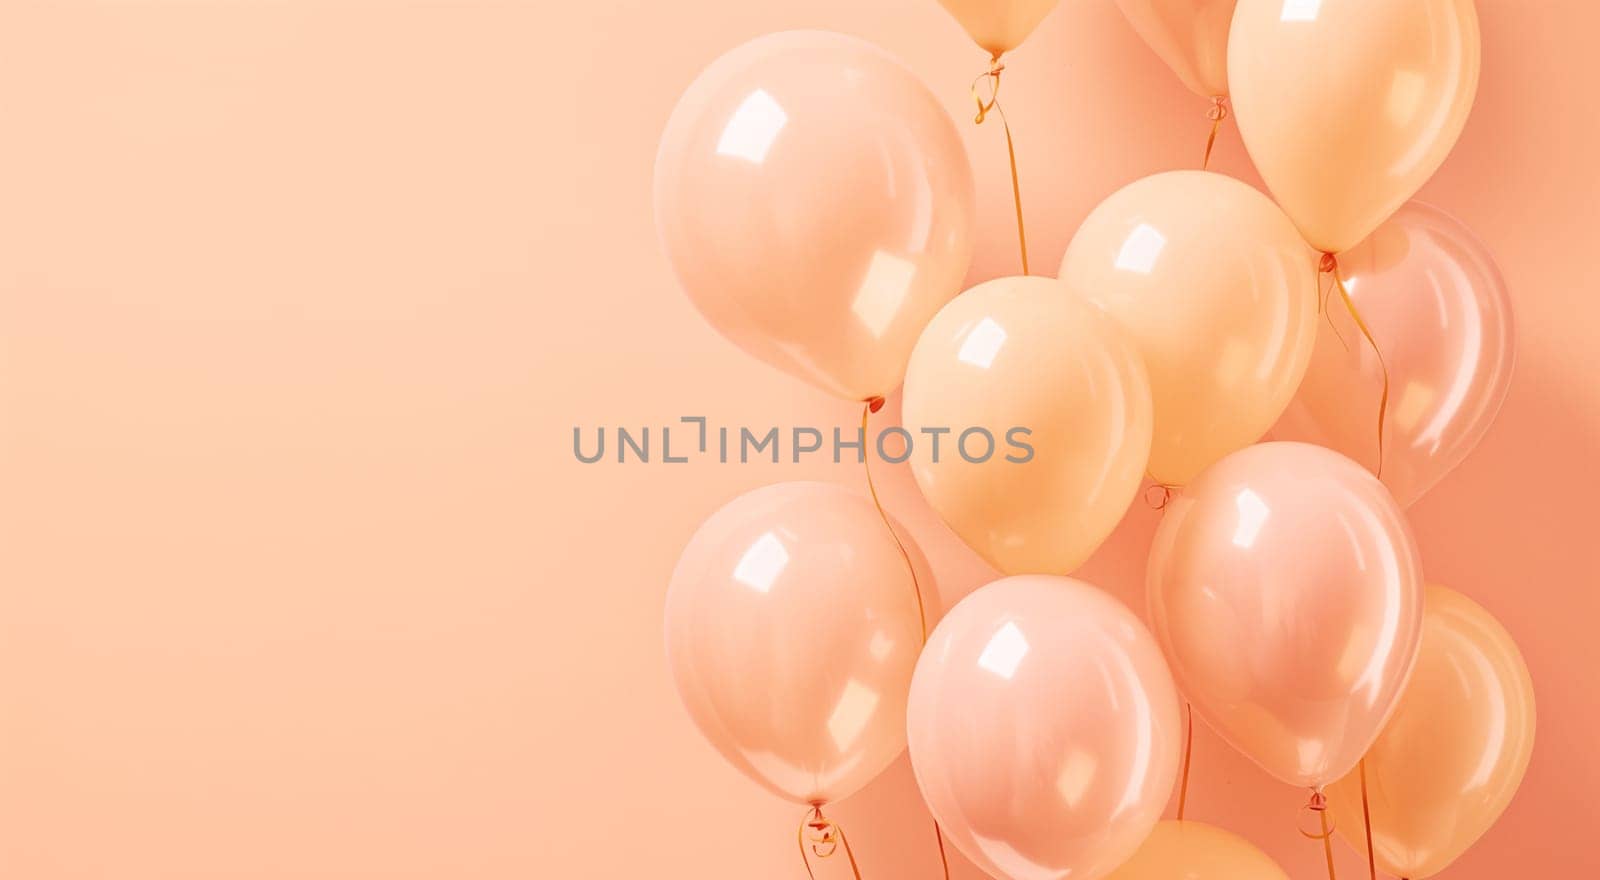 Peach-colored balloons on a soft pink background, festive and airy feel. High quality photo